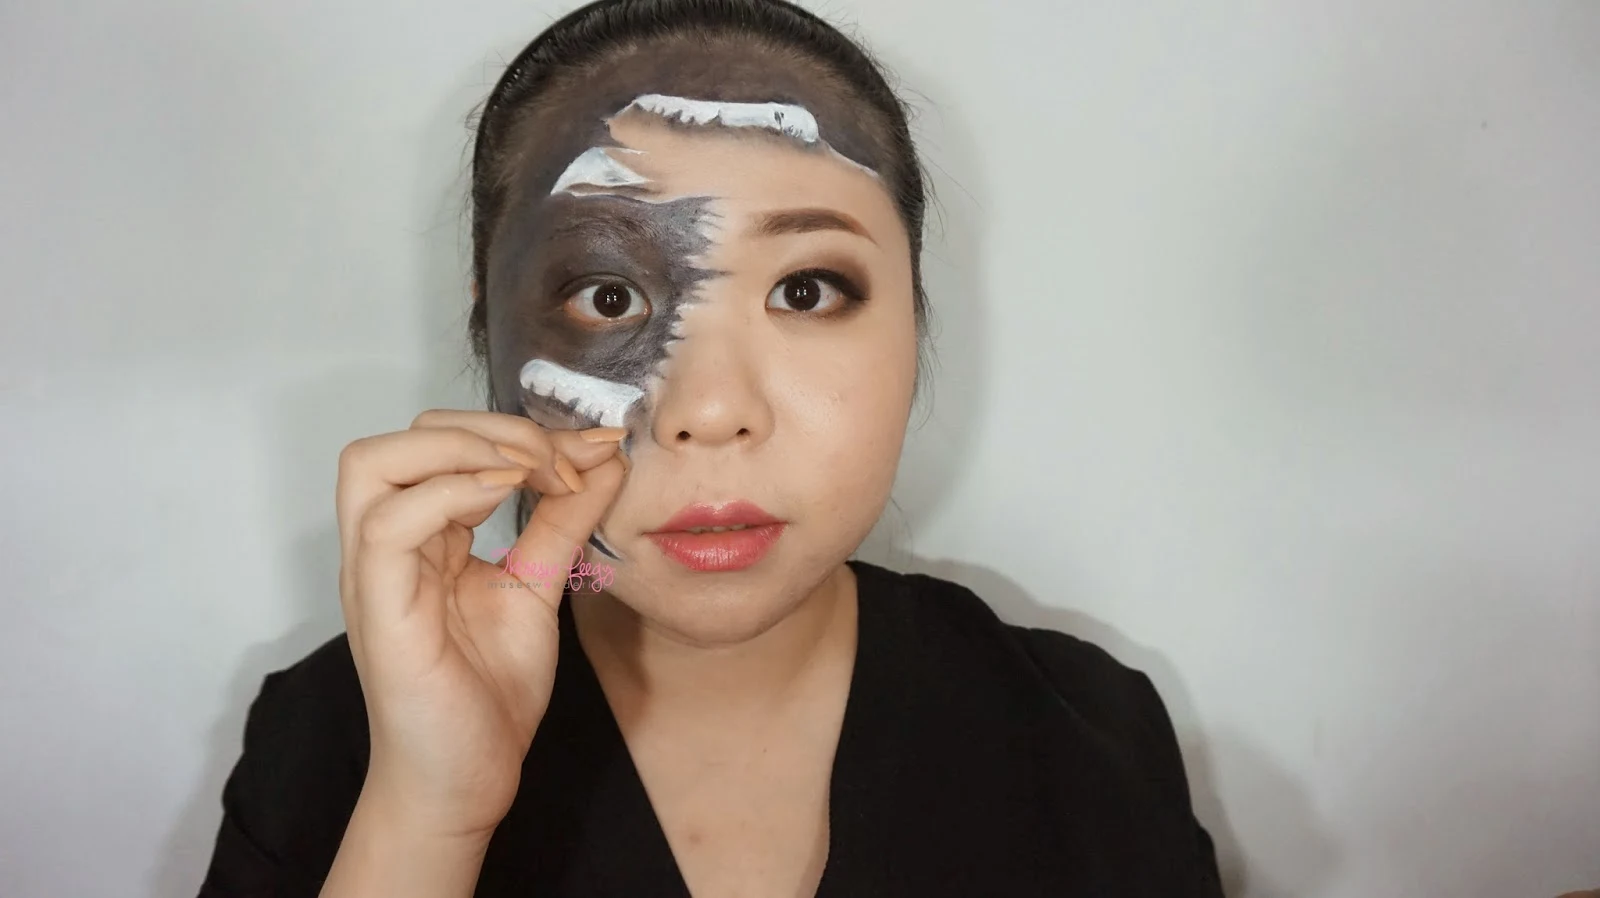 THE AMAZING POWER OF MAKEUP PAPER RIPPED 3D ILLUSION ON SKIN